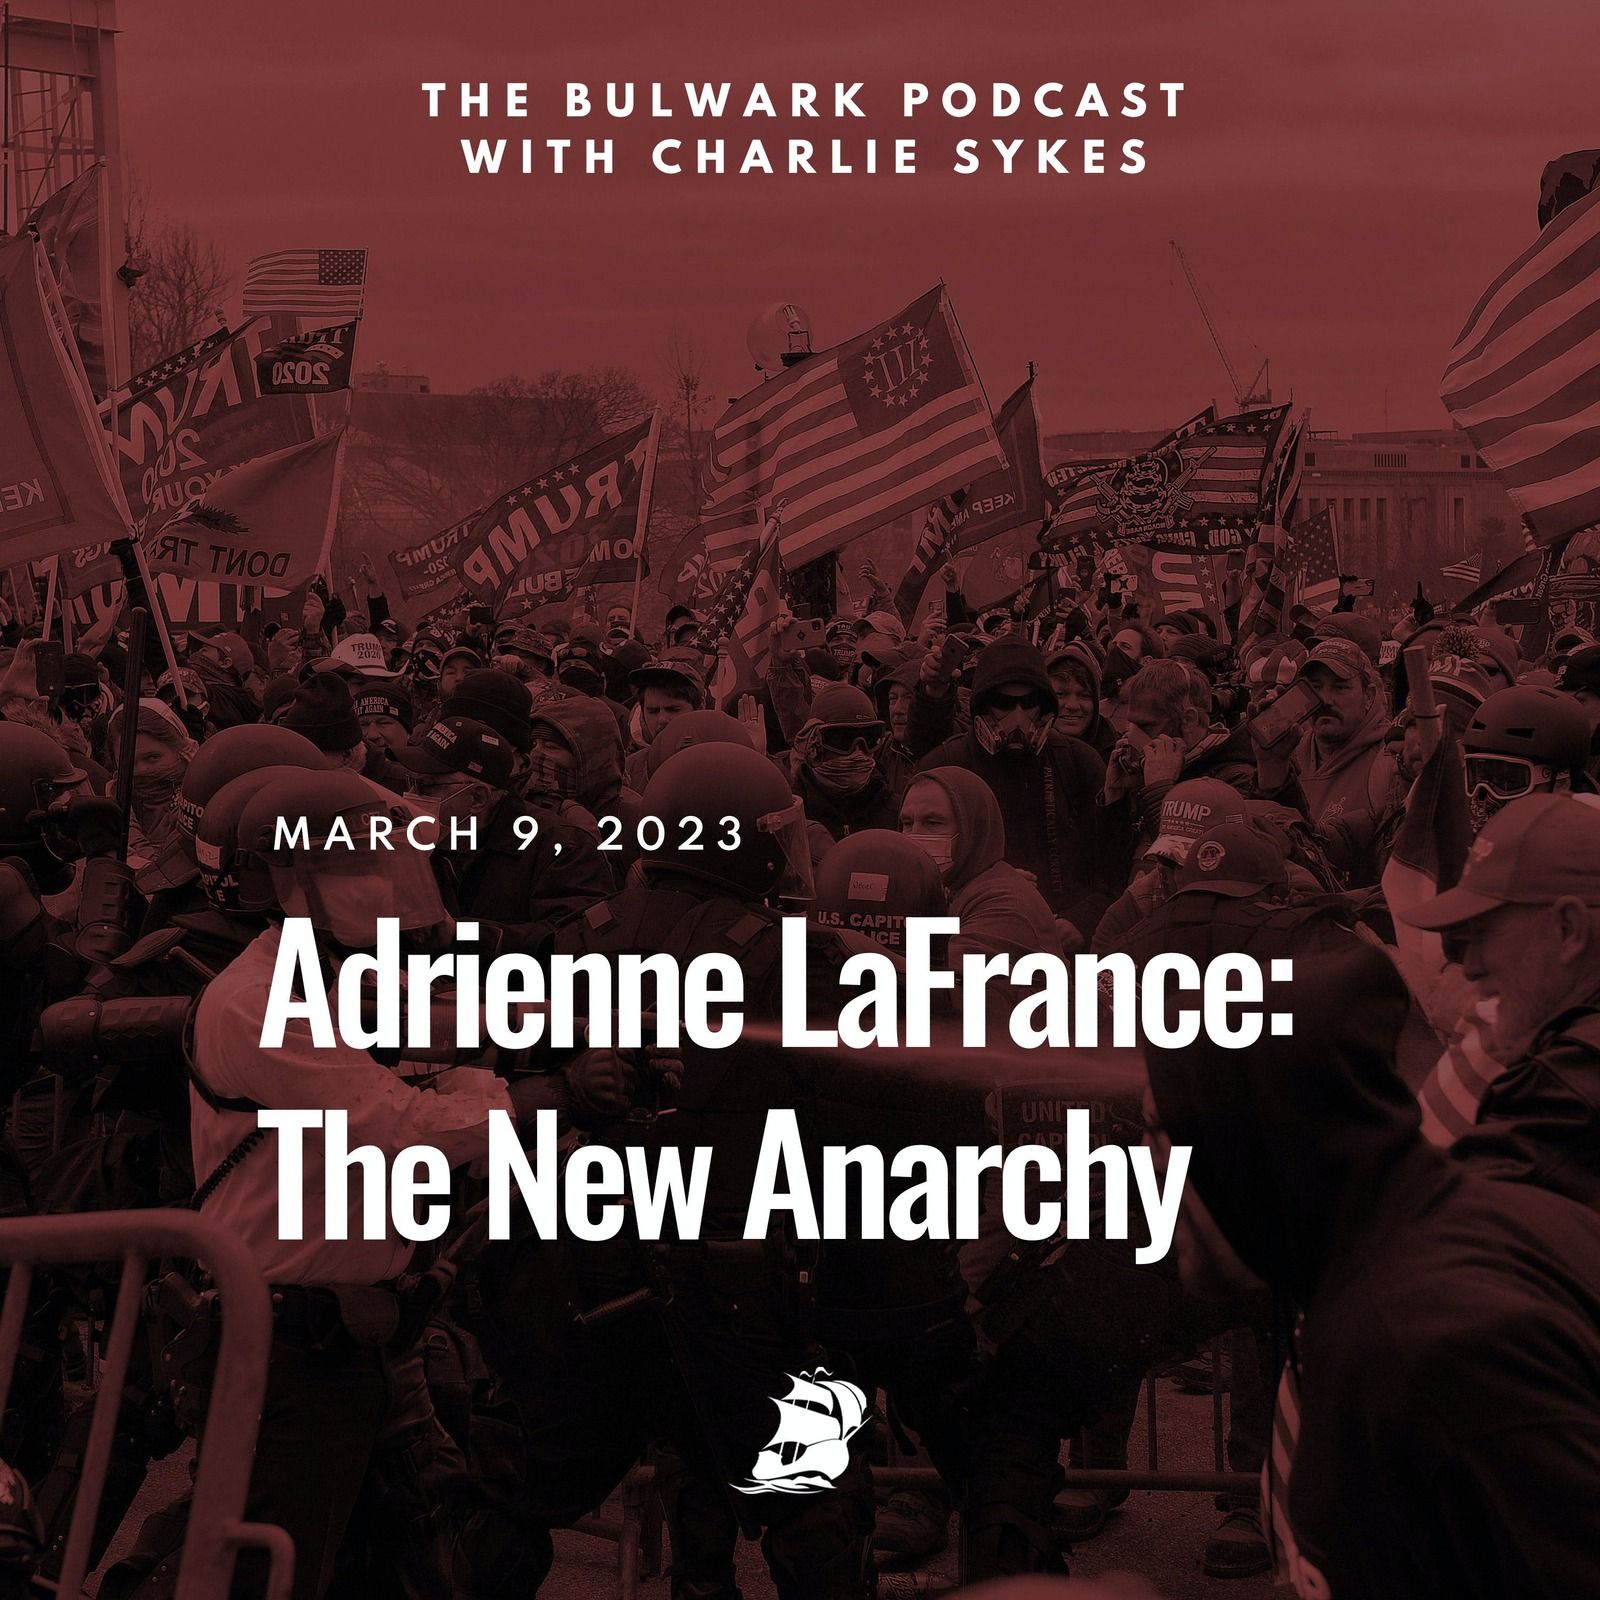 Adrienne LaFrance: The New Anarchy